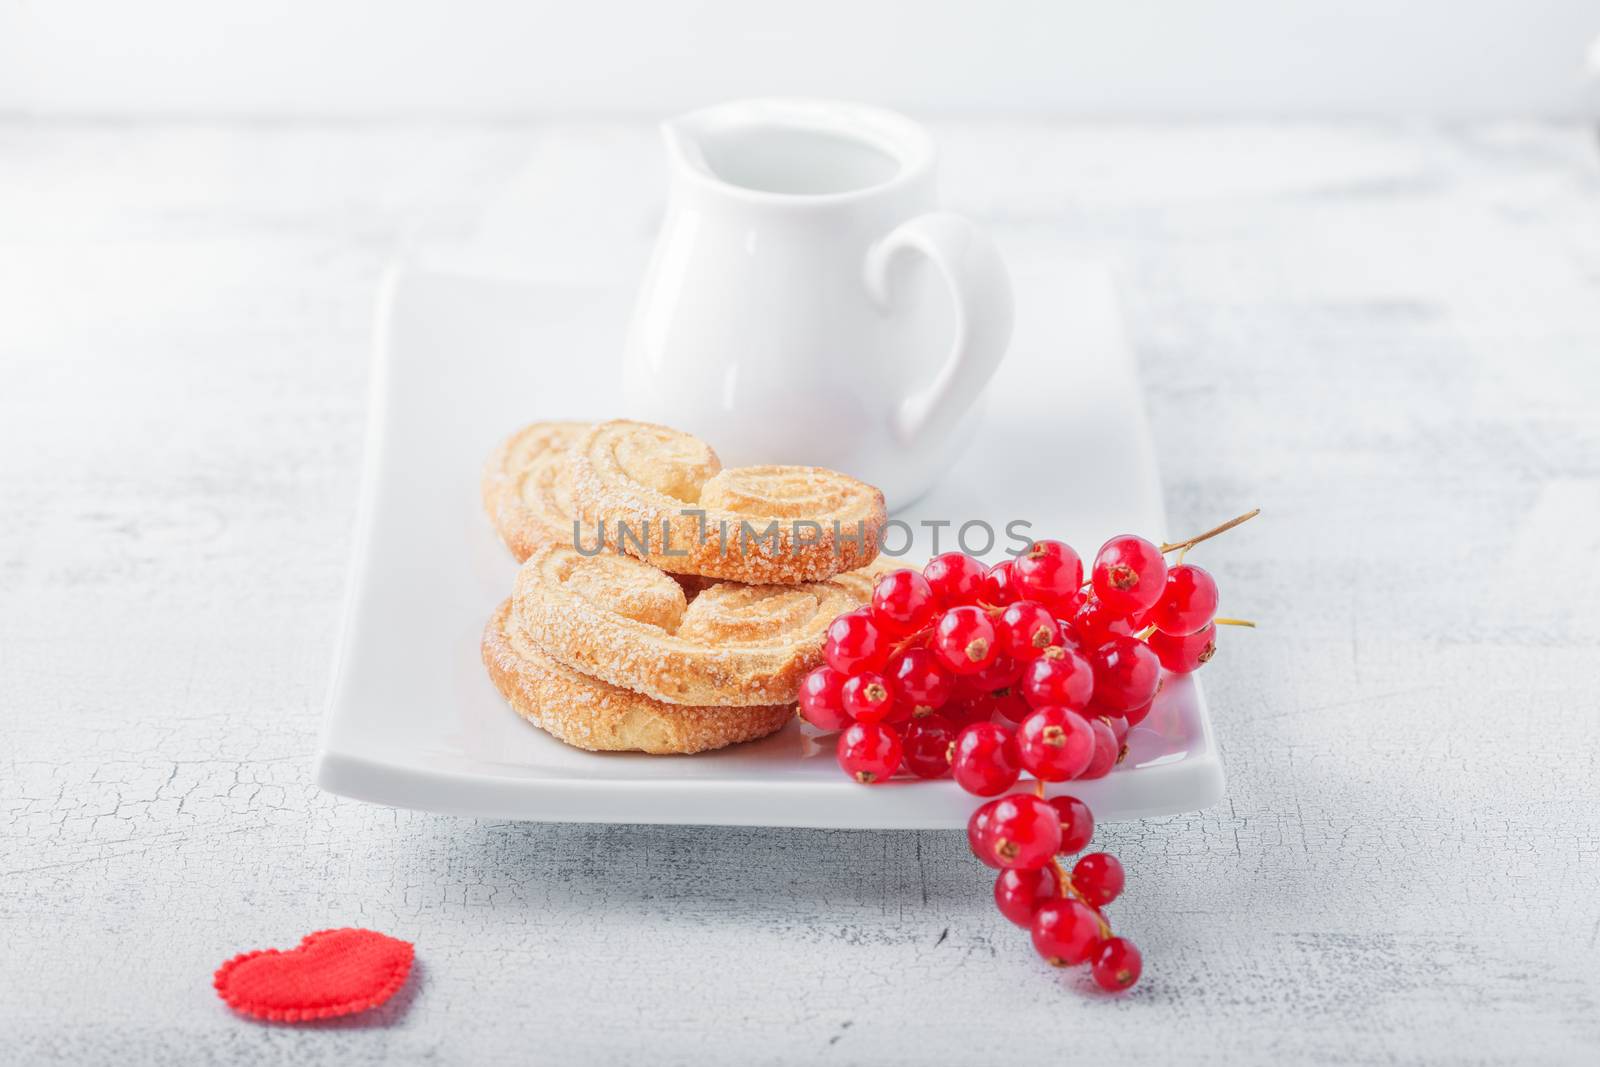 Heart-shaped biscuits wiith sugar and cinnamon 
for Valentine's Day 